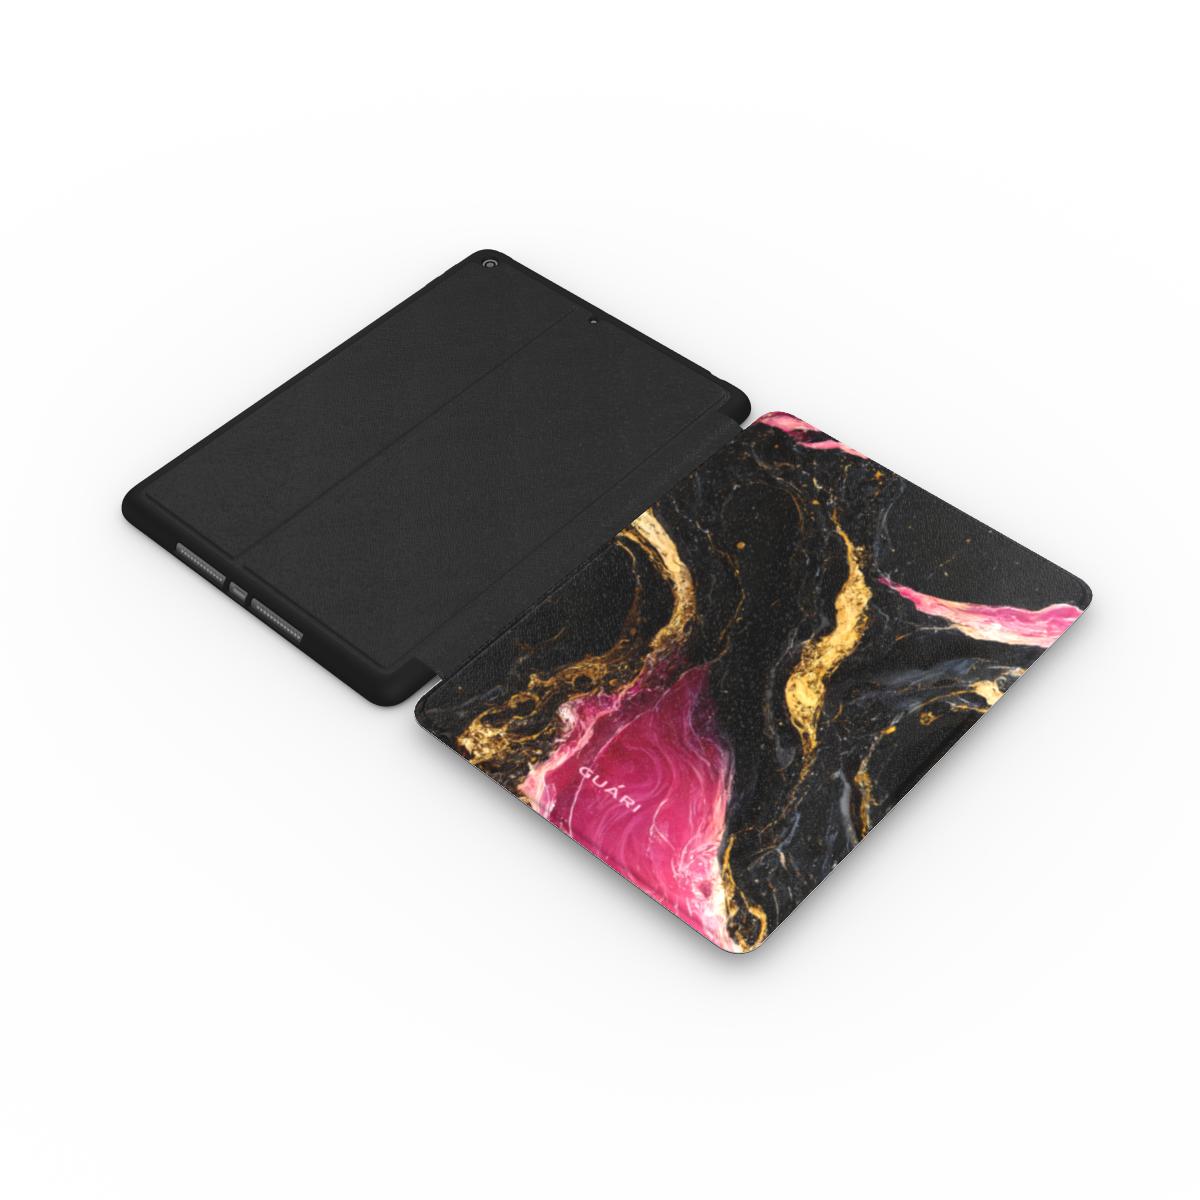 RUBY LUXE IPAD CASE